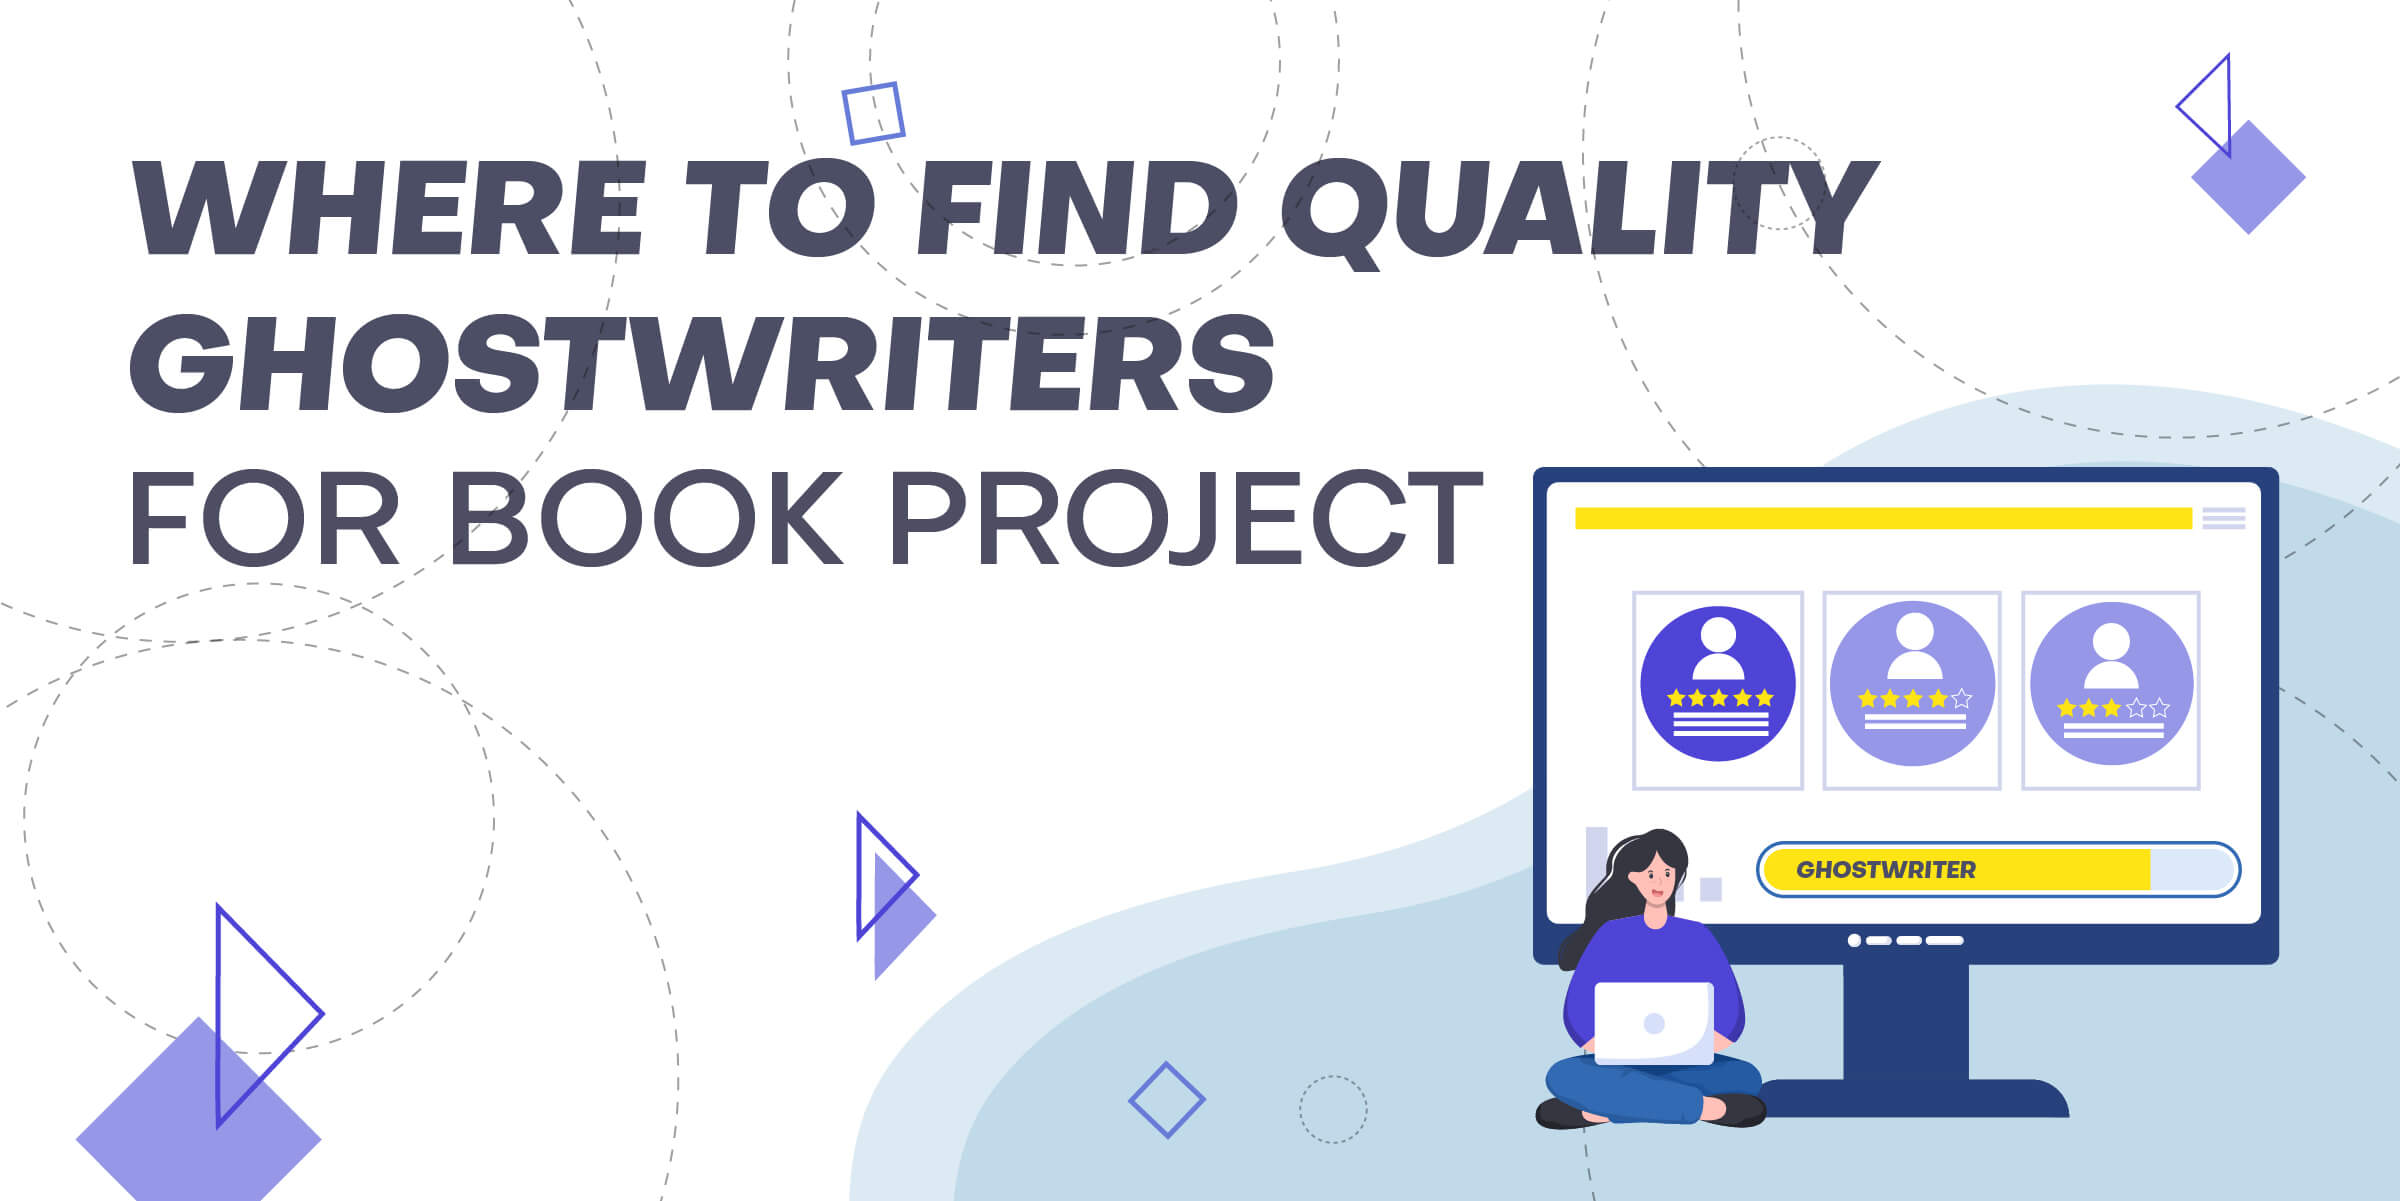 Where to Find Quality Ghostwriters for Book Project